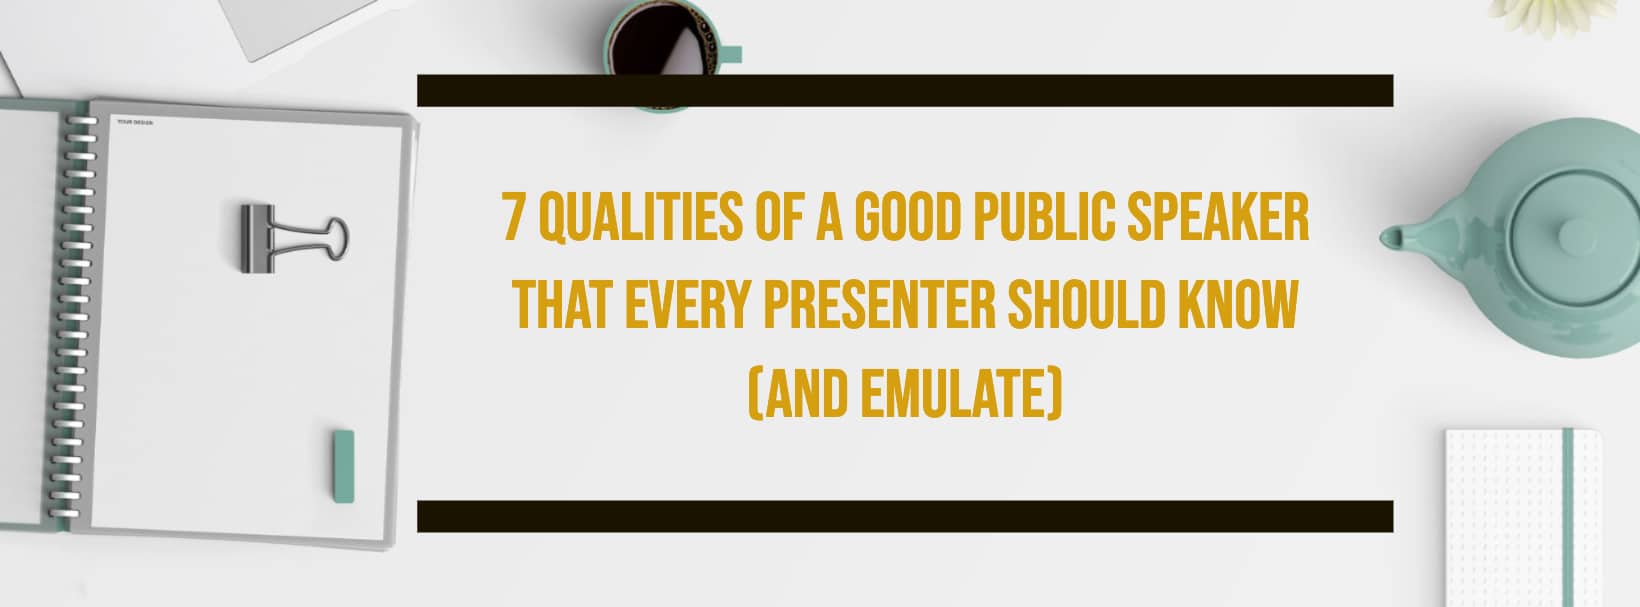 7-Qualities-of-a-Good-Public-Speaker-That-Every-Presenter-Should-Know-And-Emulate